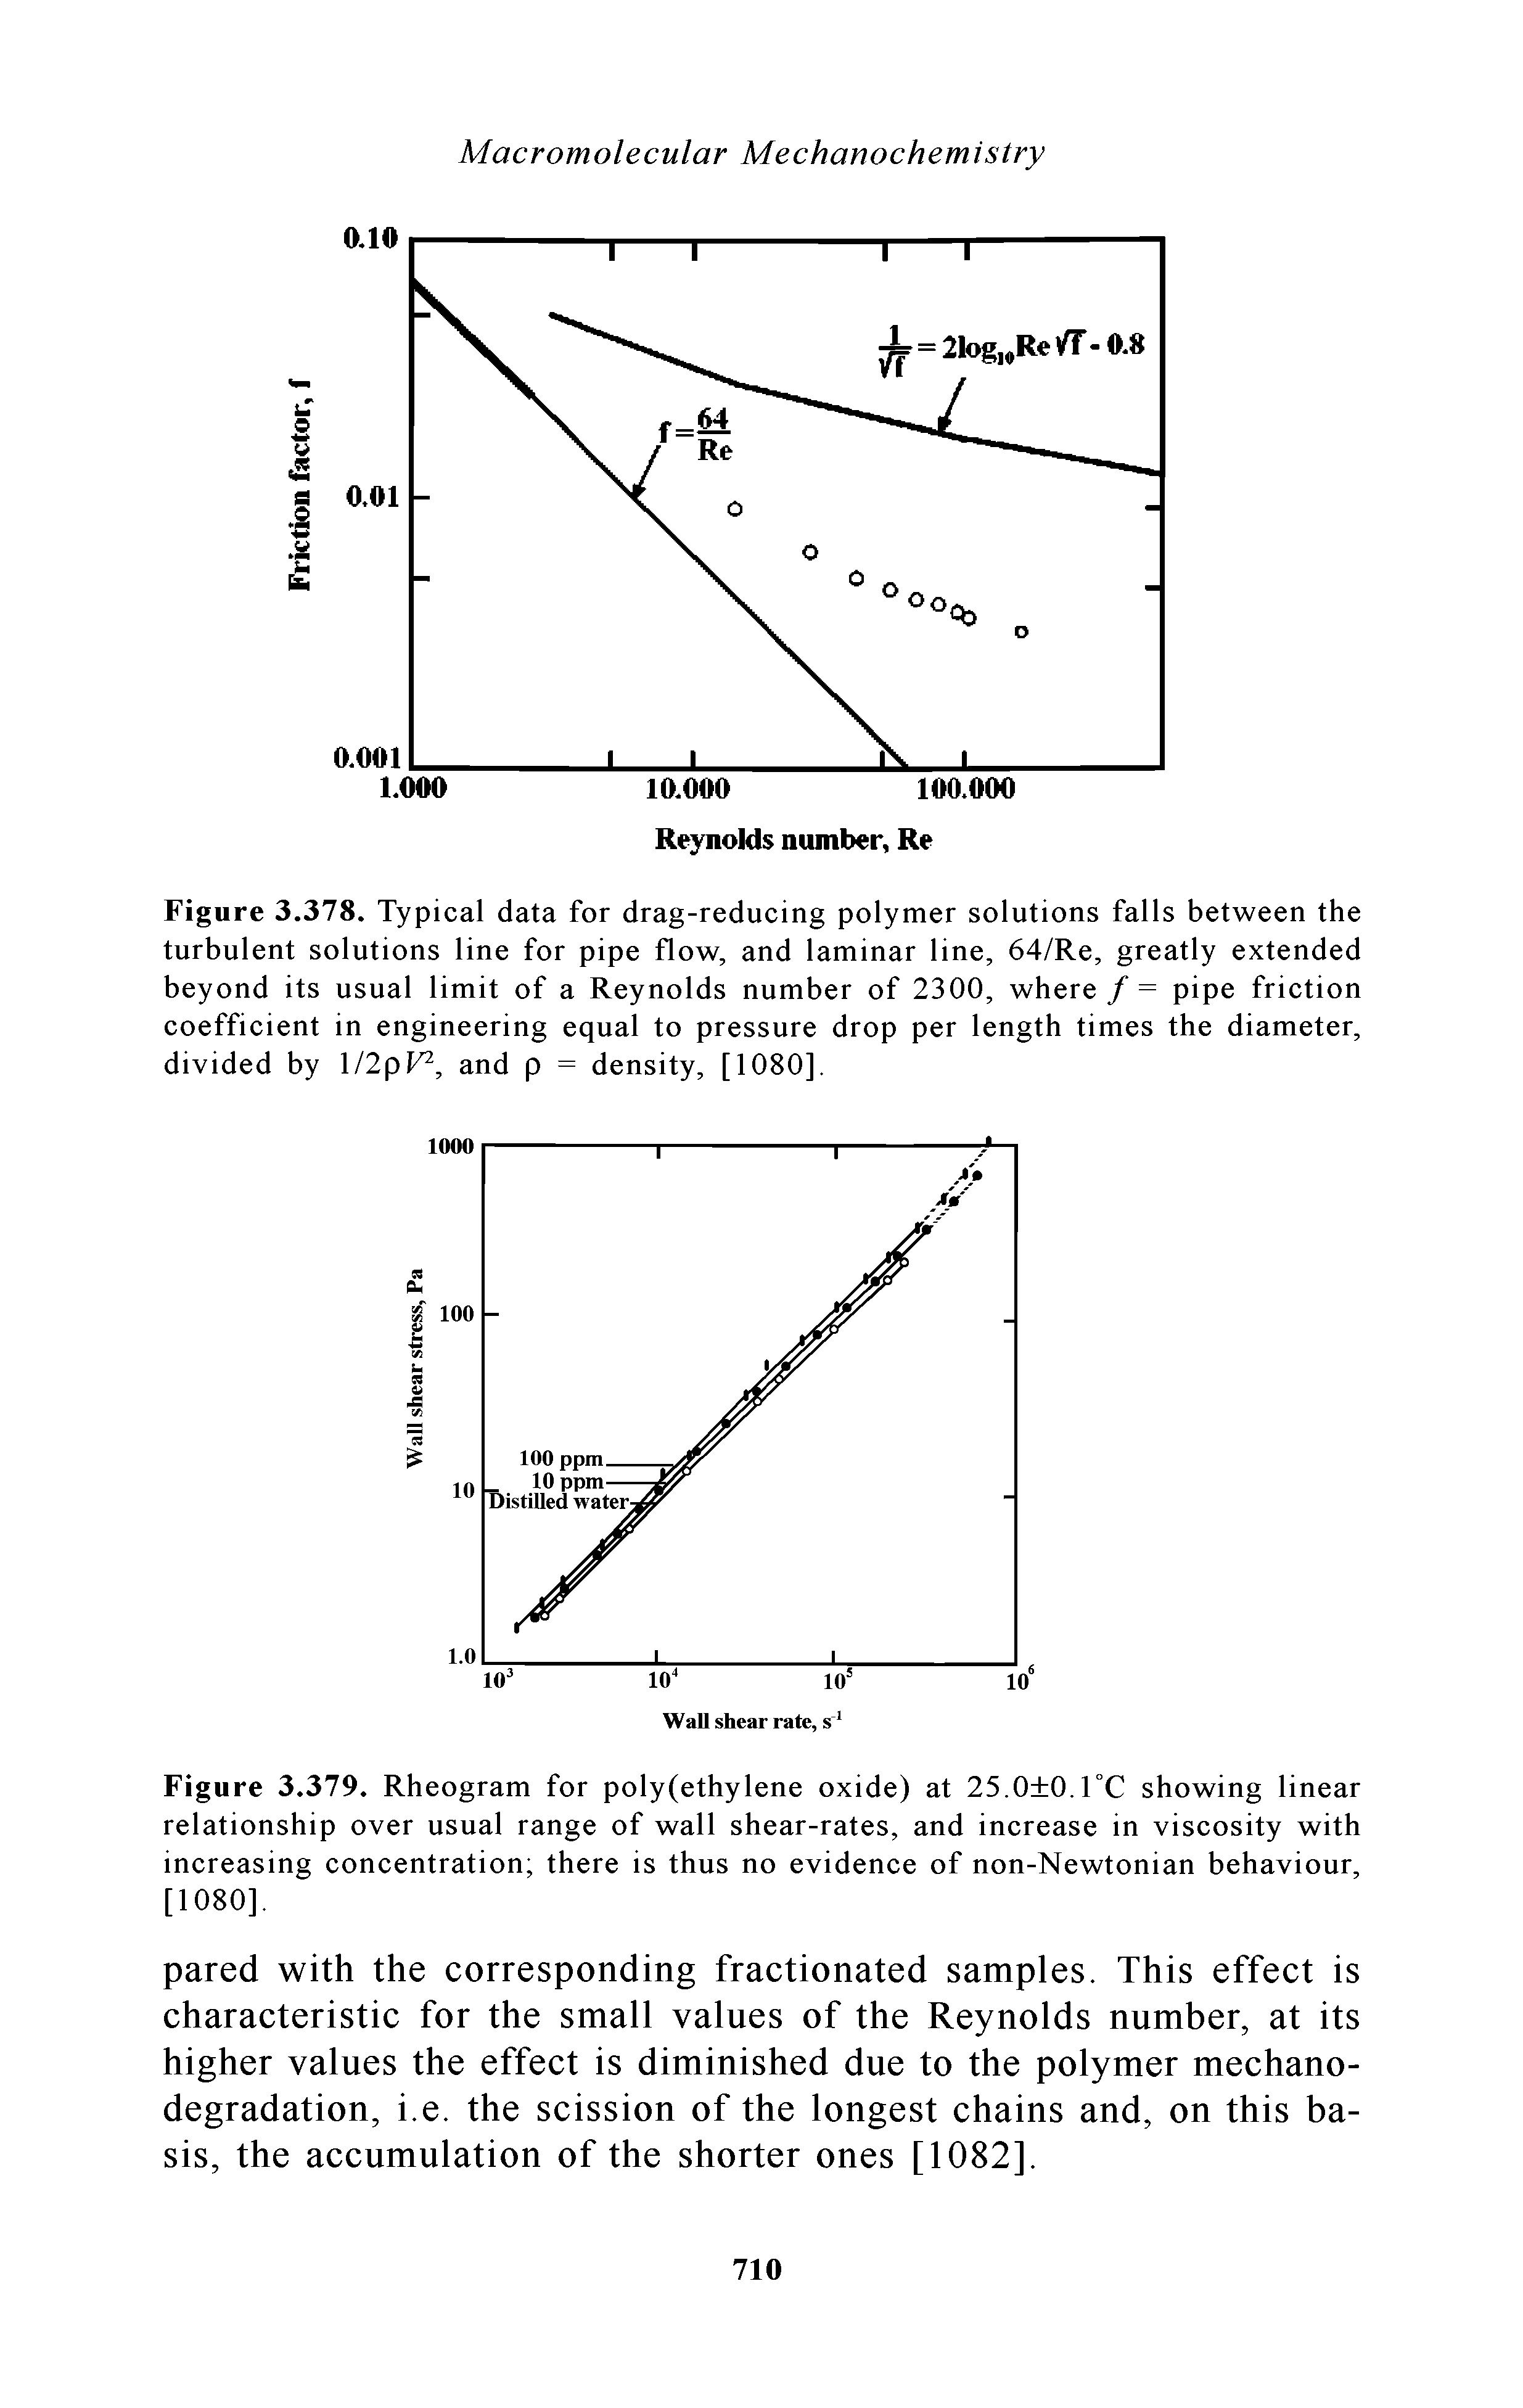 Figure 3.378. Typical data for drag-reducing polymer solutions falls between the turbulent solutions line for pipe flow, and laminar line, 64/Re, greatly extended beyond its usual limit of a Reynolds number of 2300, where /= pipe friction coefficient in engineering equal to pressure drop per length times the diameter, divided by l/2pf, and p = density, [1080],...